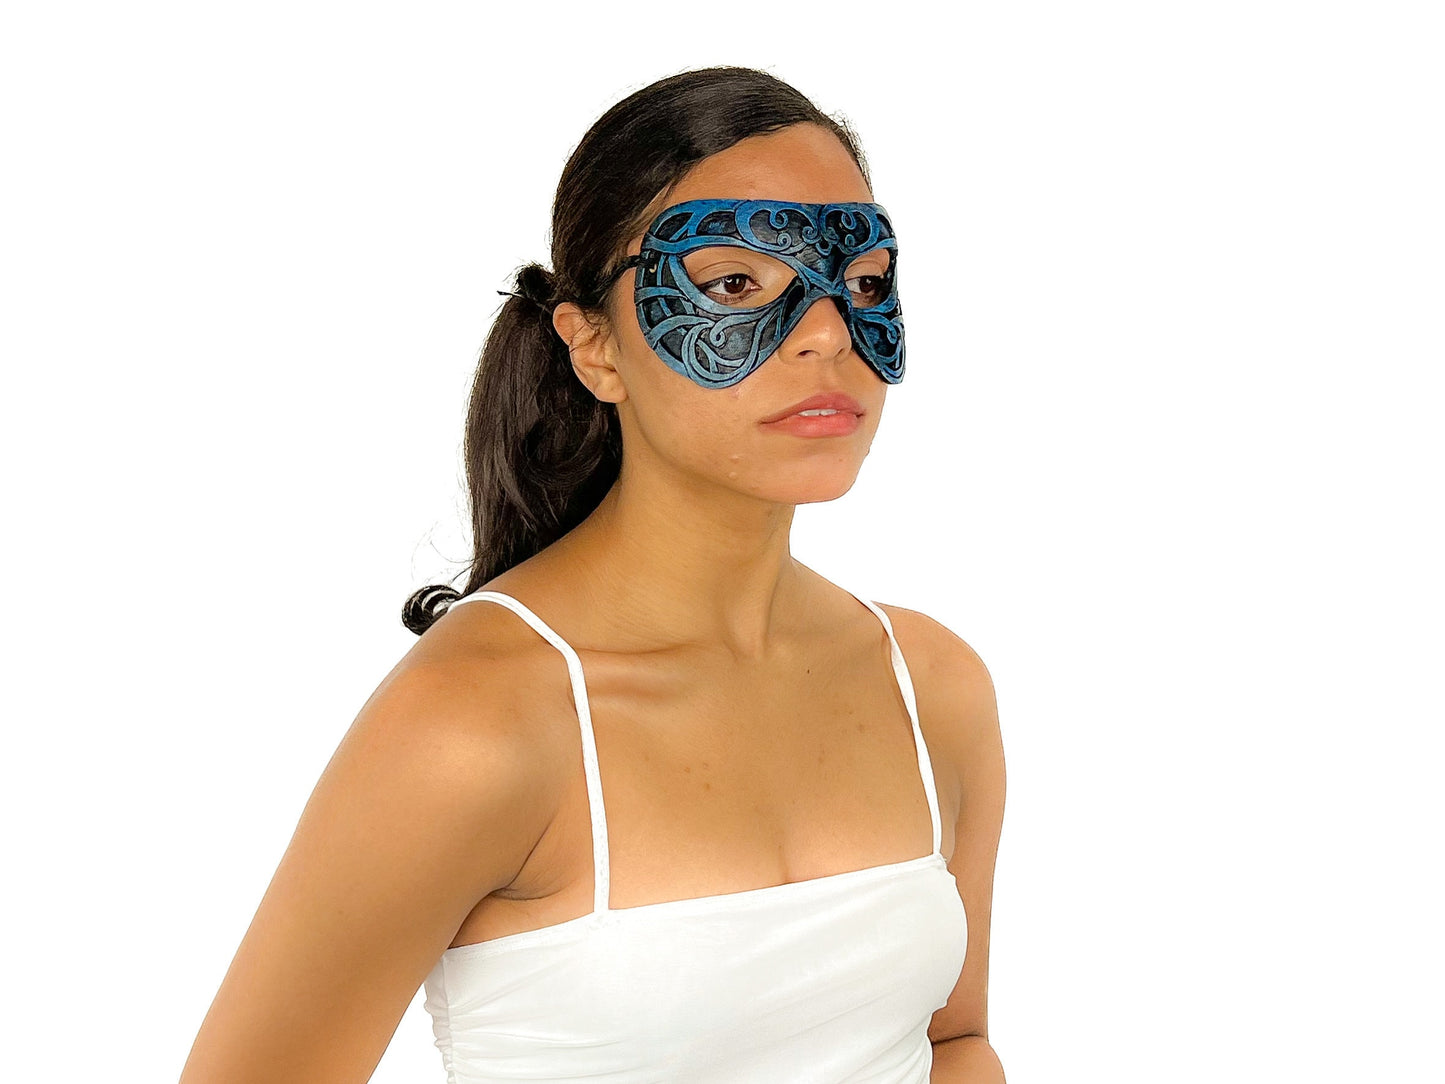 Dual Layer Ornate Masquerade Handmade Genuine Leather Eye Mask in Blue and Black